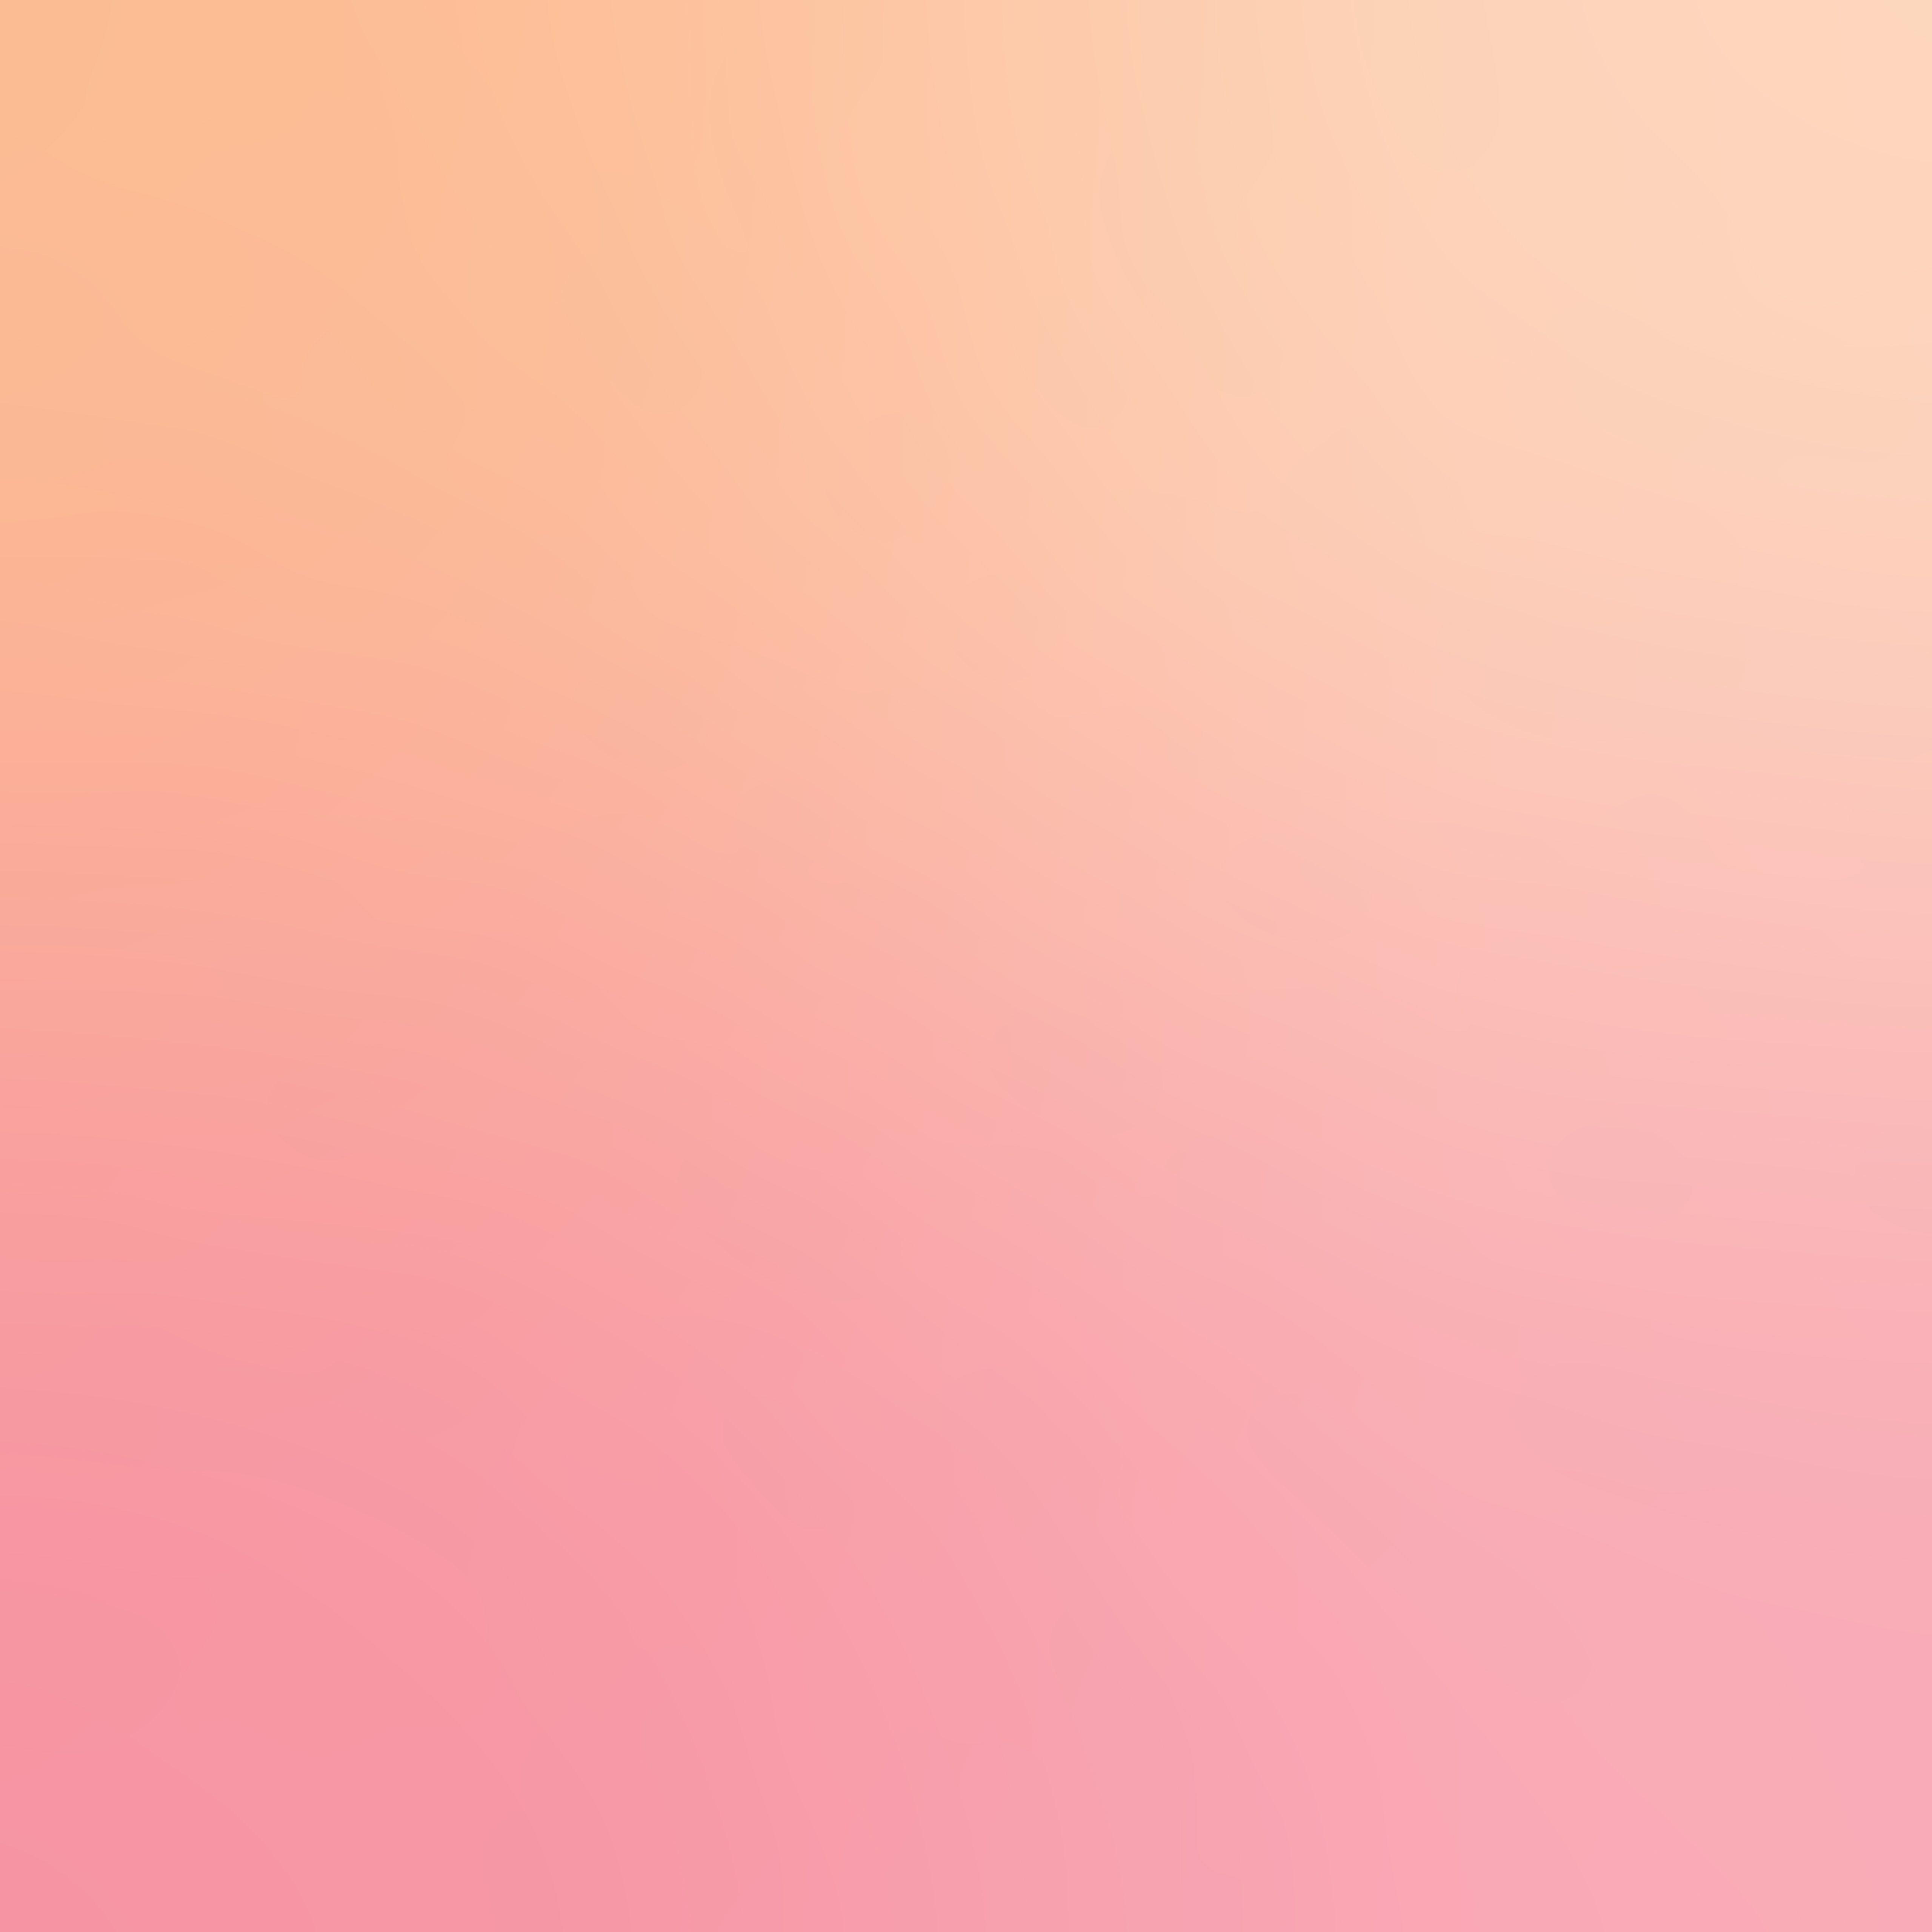 Pink Peach Gradient Background Ultra HD Desktop Background Wallpaper for   Multi Display Dual Monitor  Tablet  Smartphone